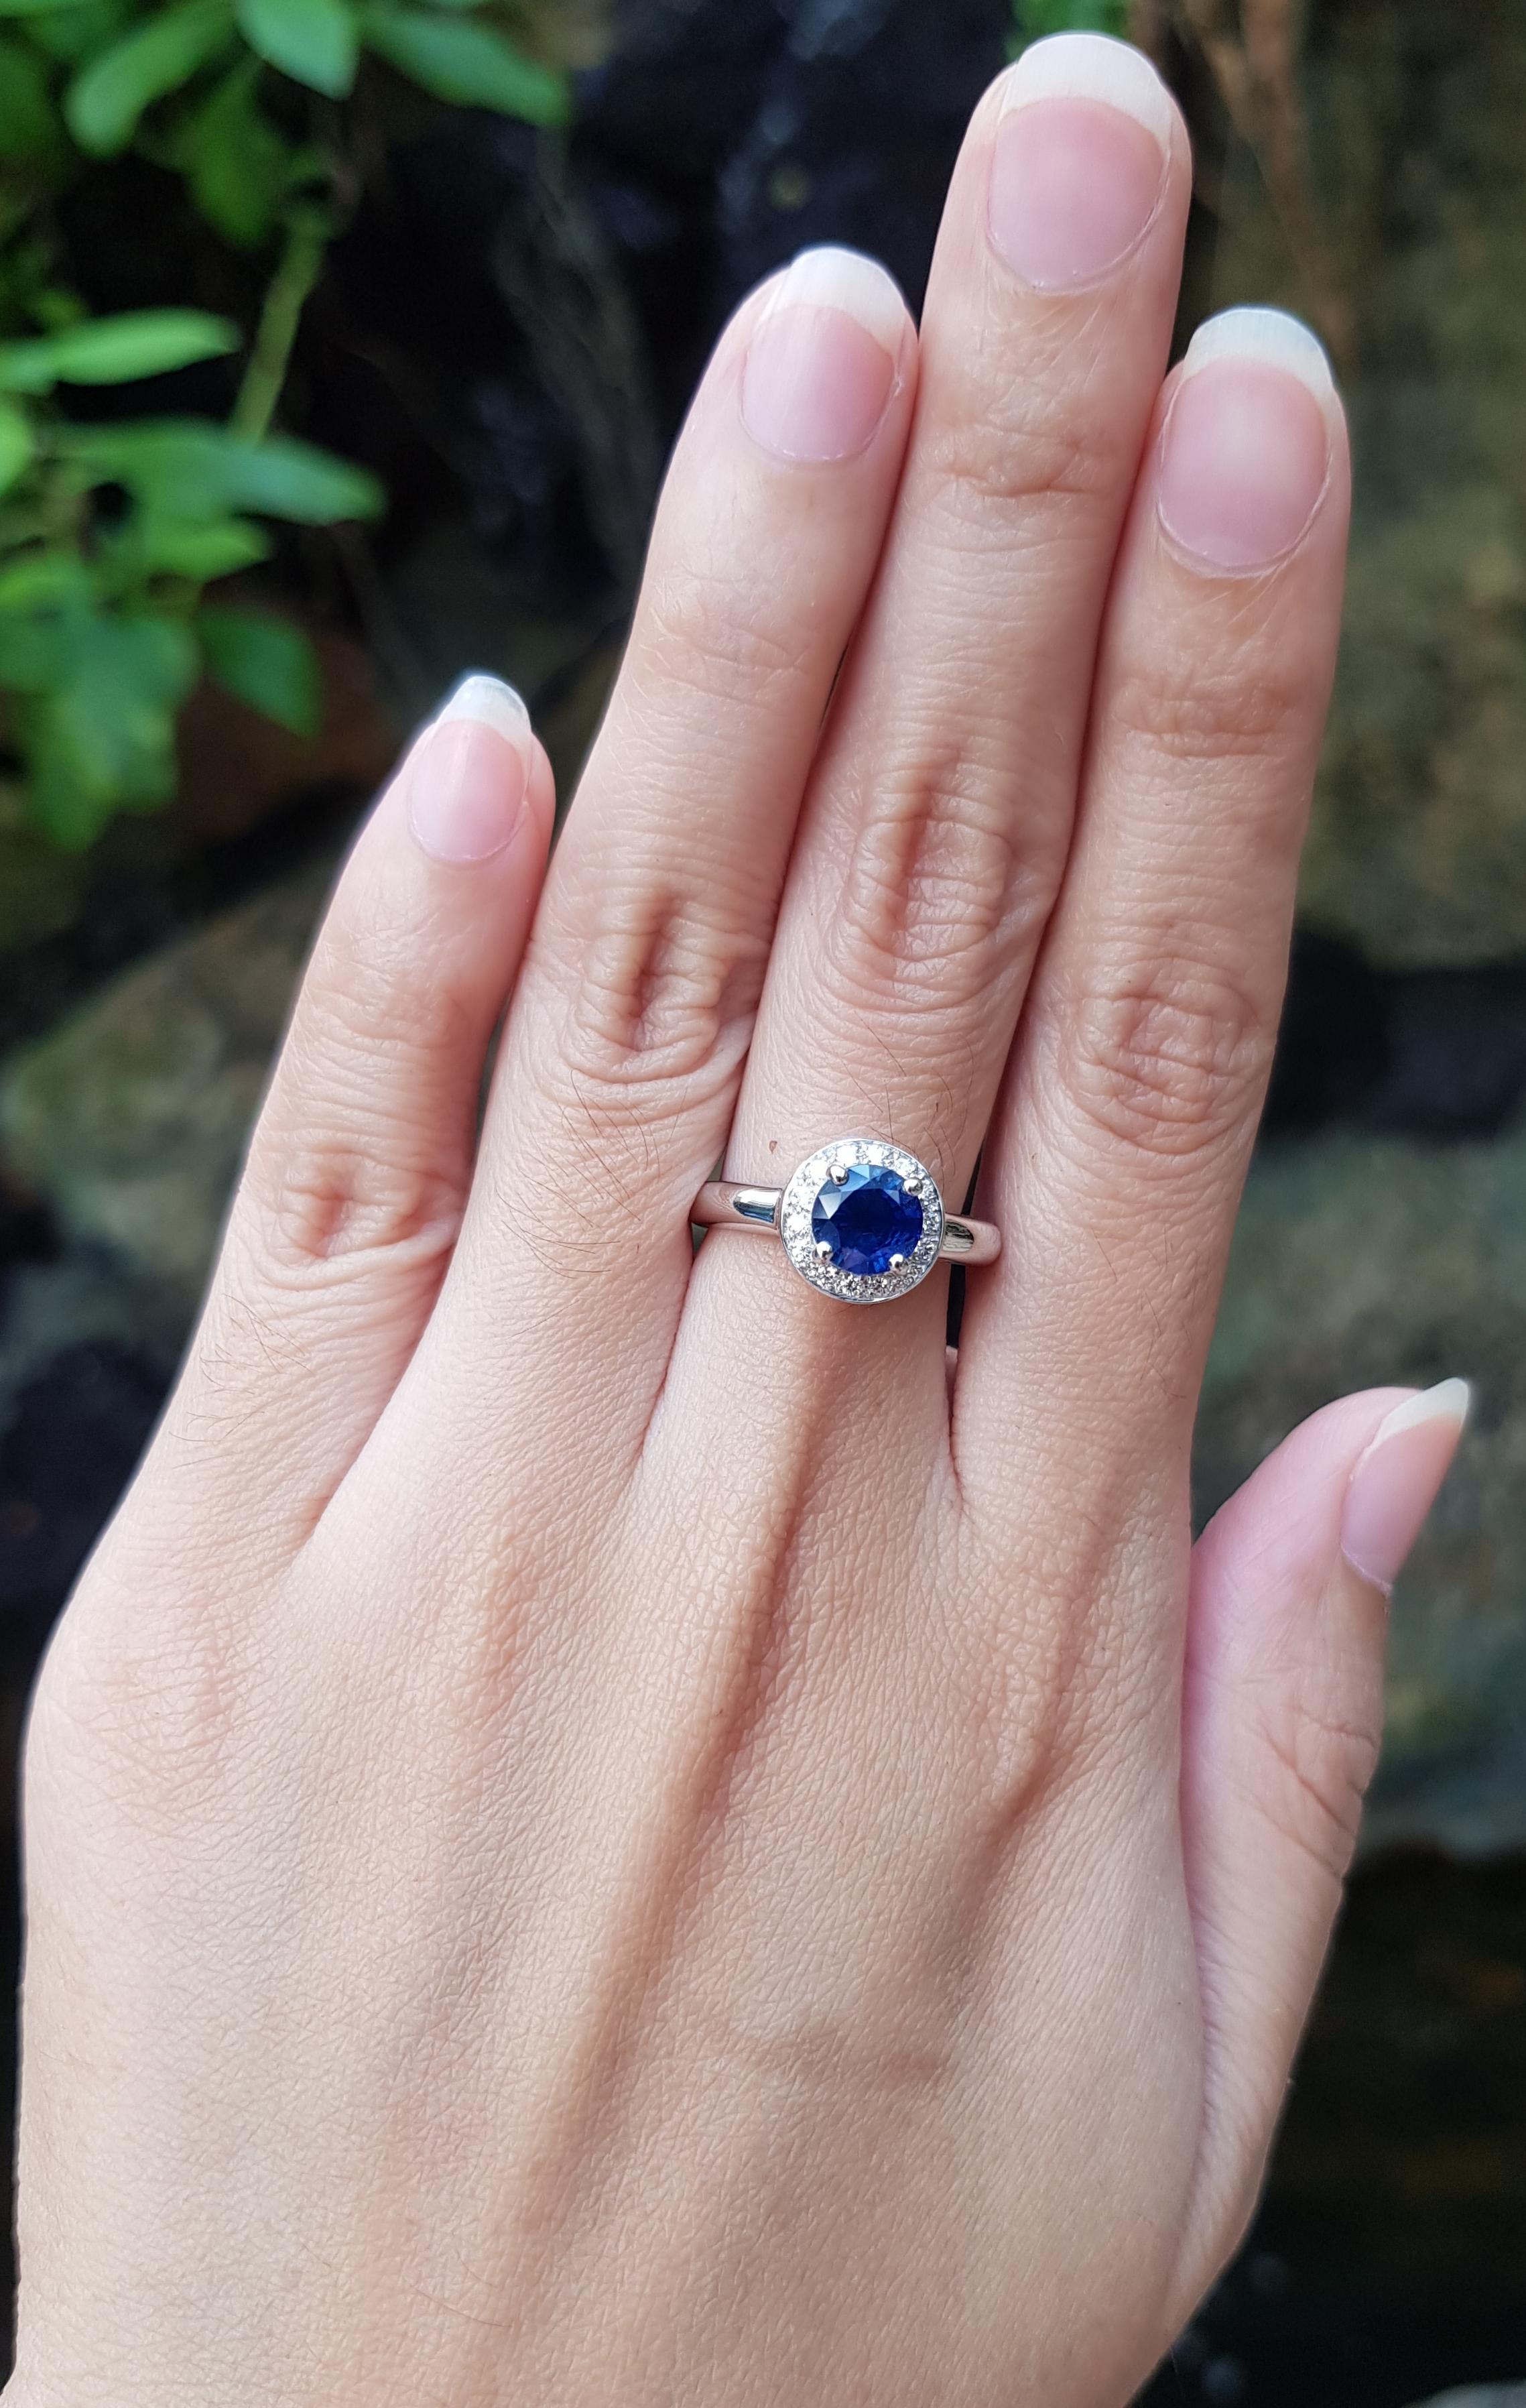 Blue Sapphire 1.59 carats with Diamond 0.14 carat Ring set in 18 Karat White Gold Settings

Width:  1.0 cm 
Length: 1.0 cm
Ring Size: 53
Total Weight: 4.84 grams

